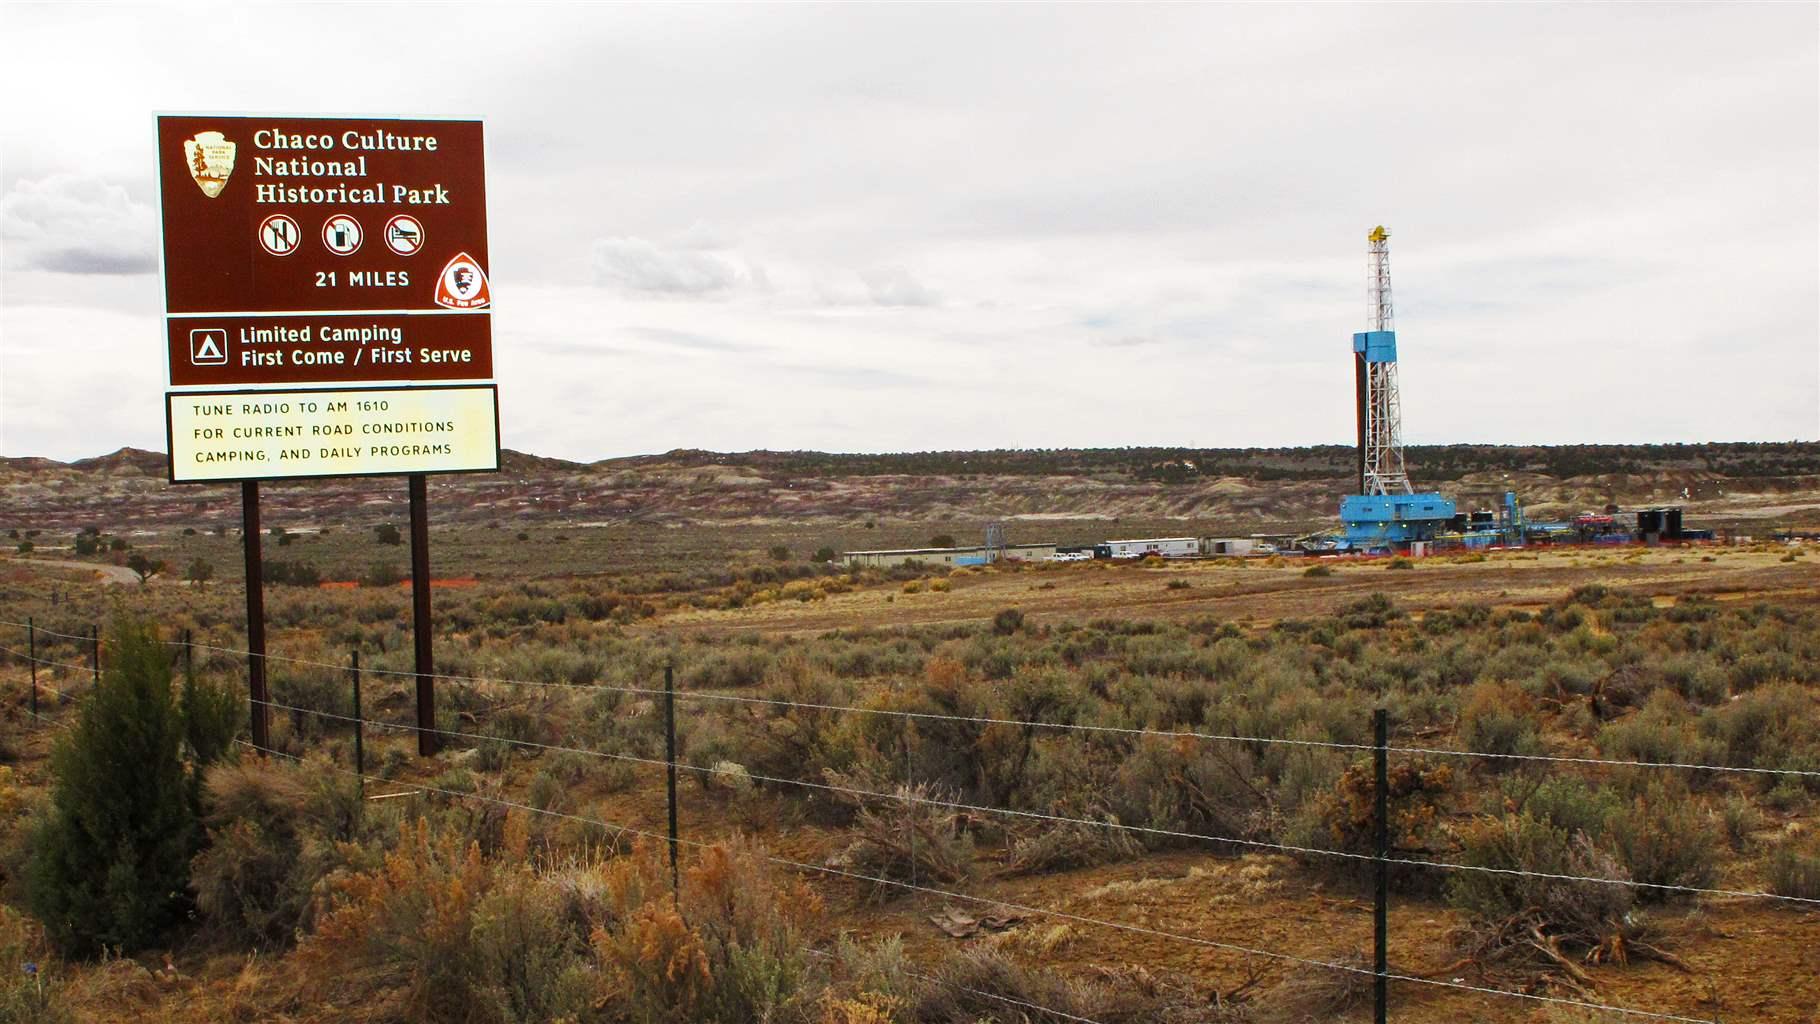 Oil and gas rigs like this one dot the landscape around the Chaco Culture National Historical Park.   